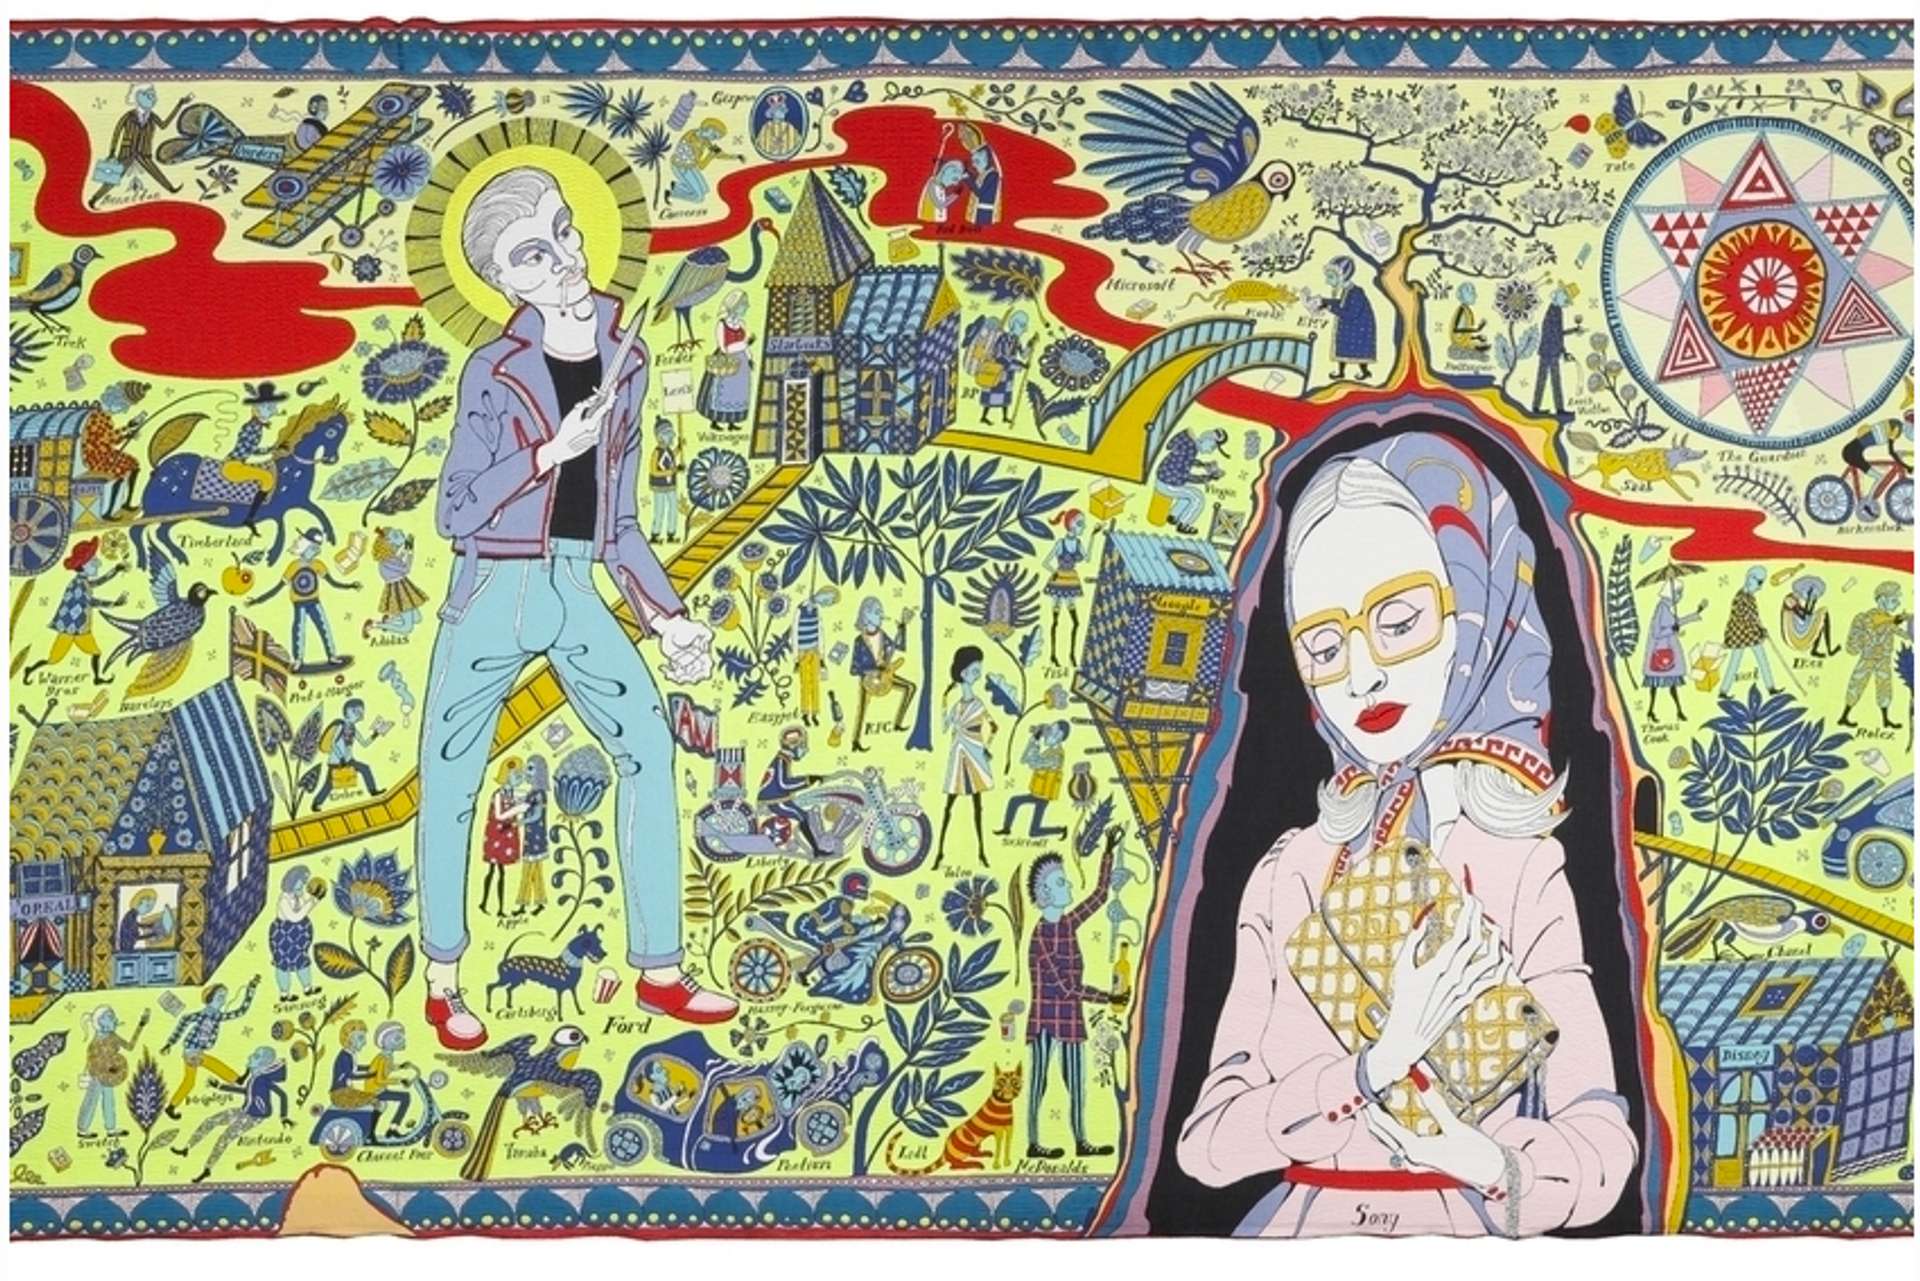 Yellow, blue and red tapestry featuring images of people, houses, birds, trees and  geometric symbols.